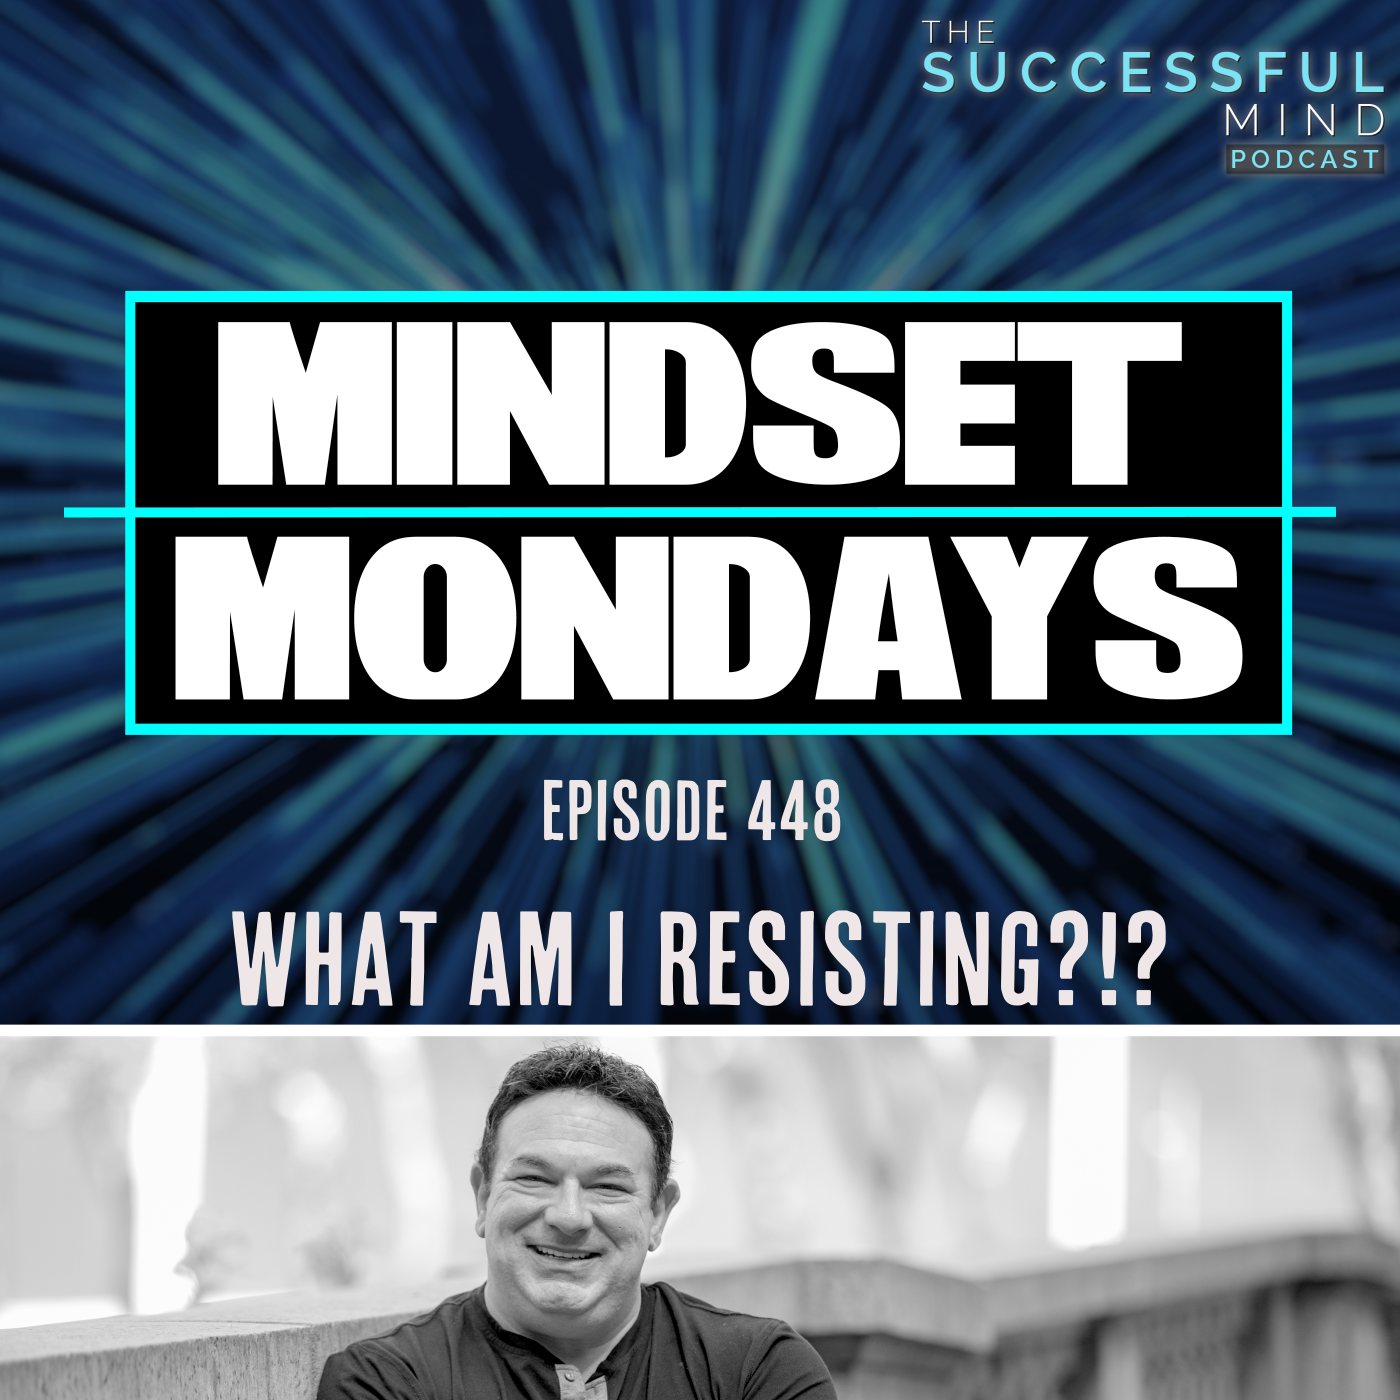 The Successful Mind Podcast – Episode 448 – Mindset Monday’s – What Am I Resisting?